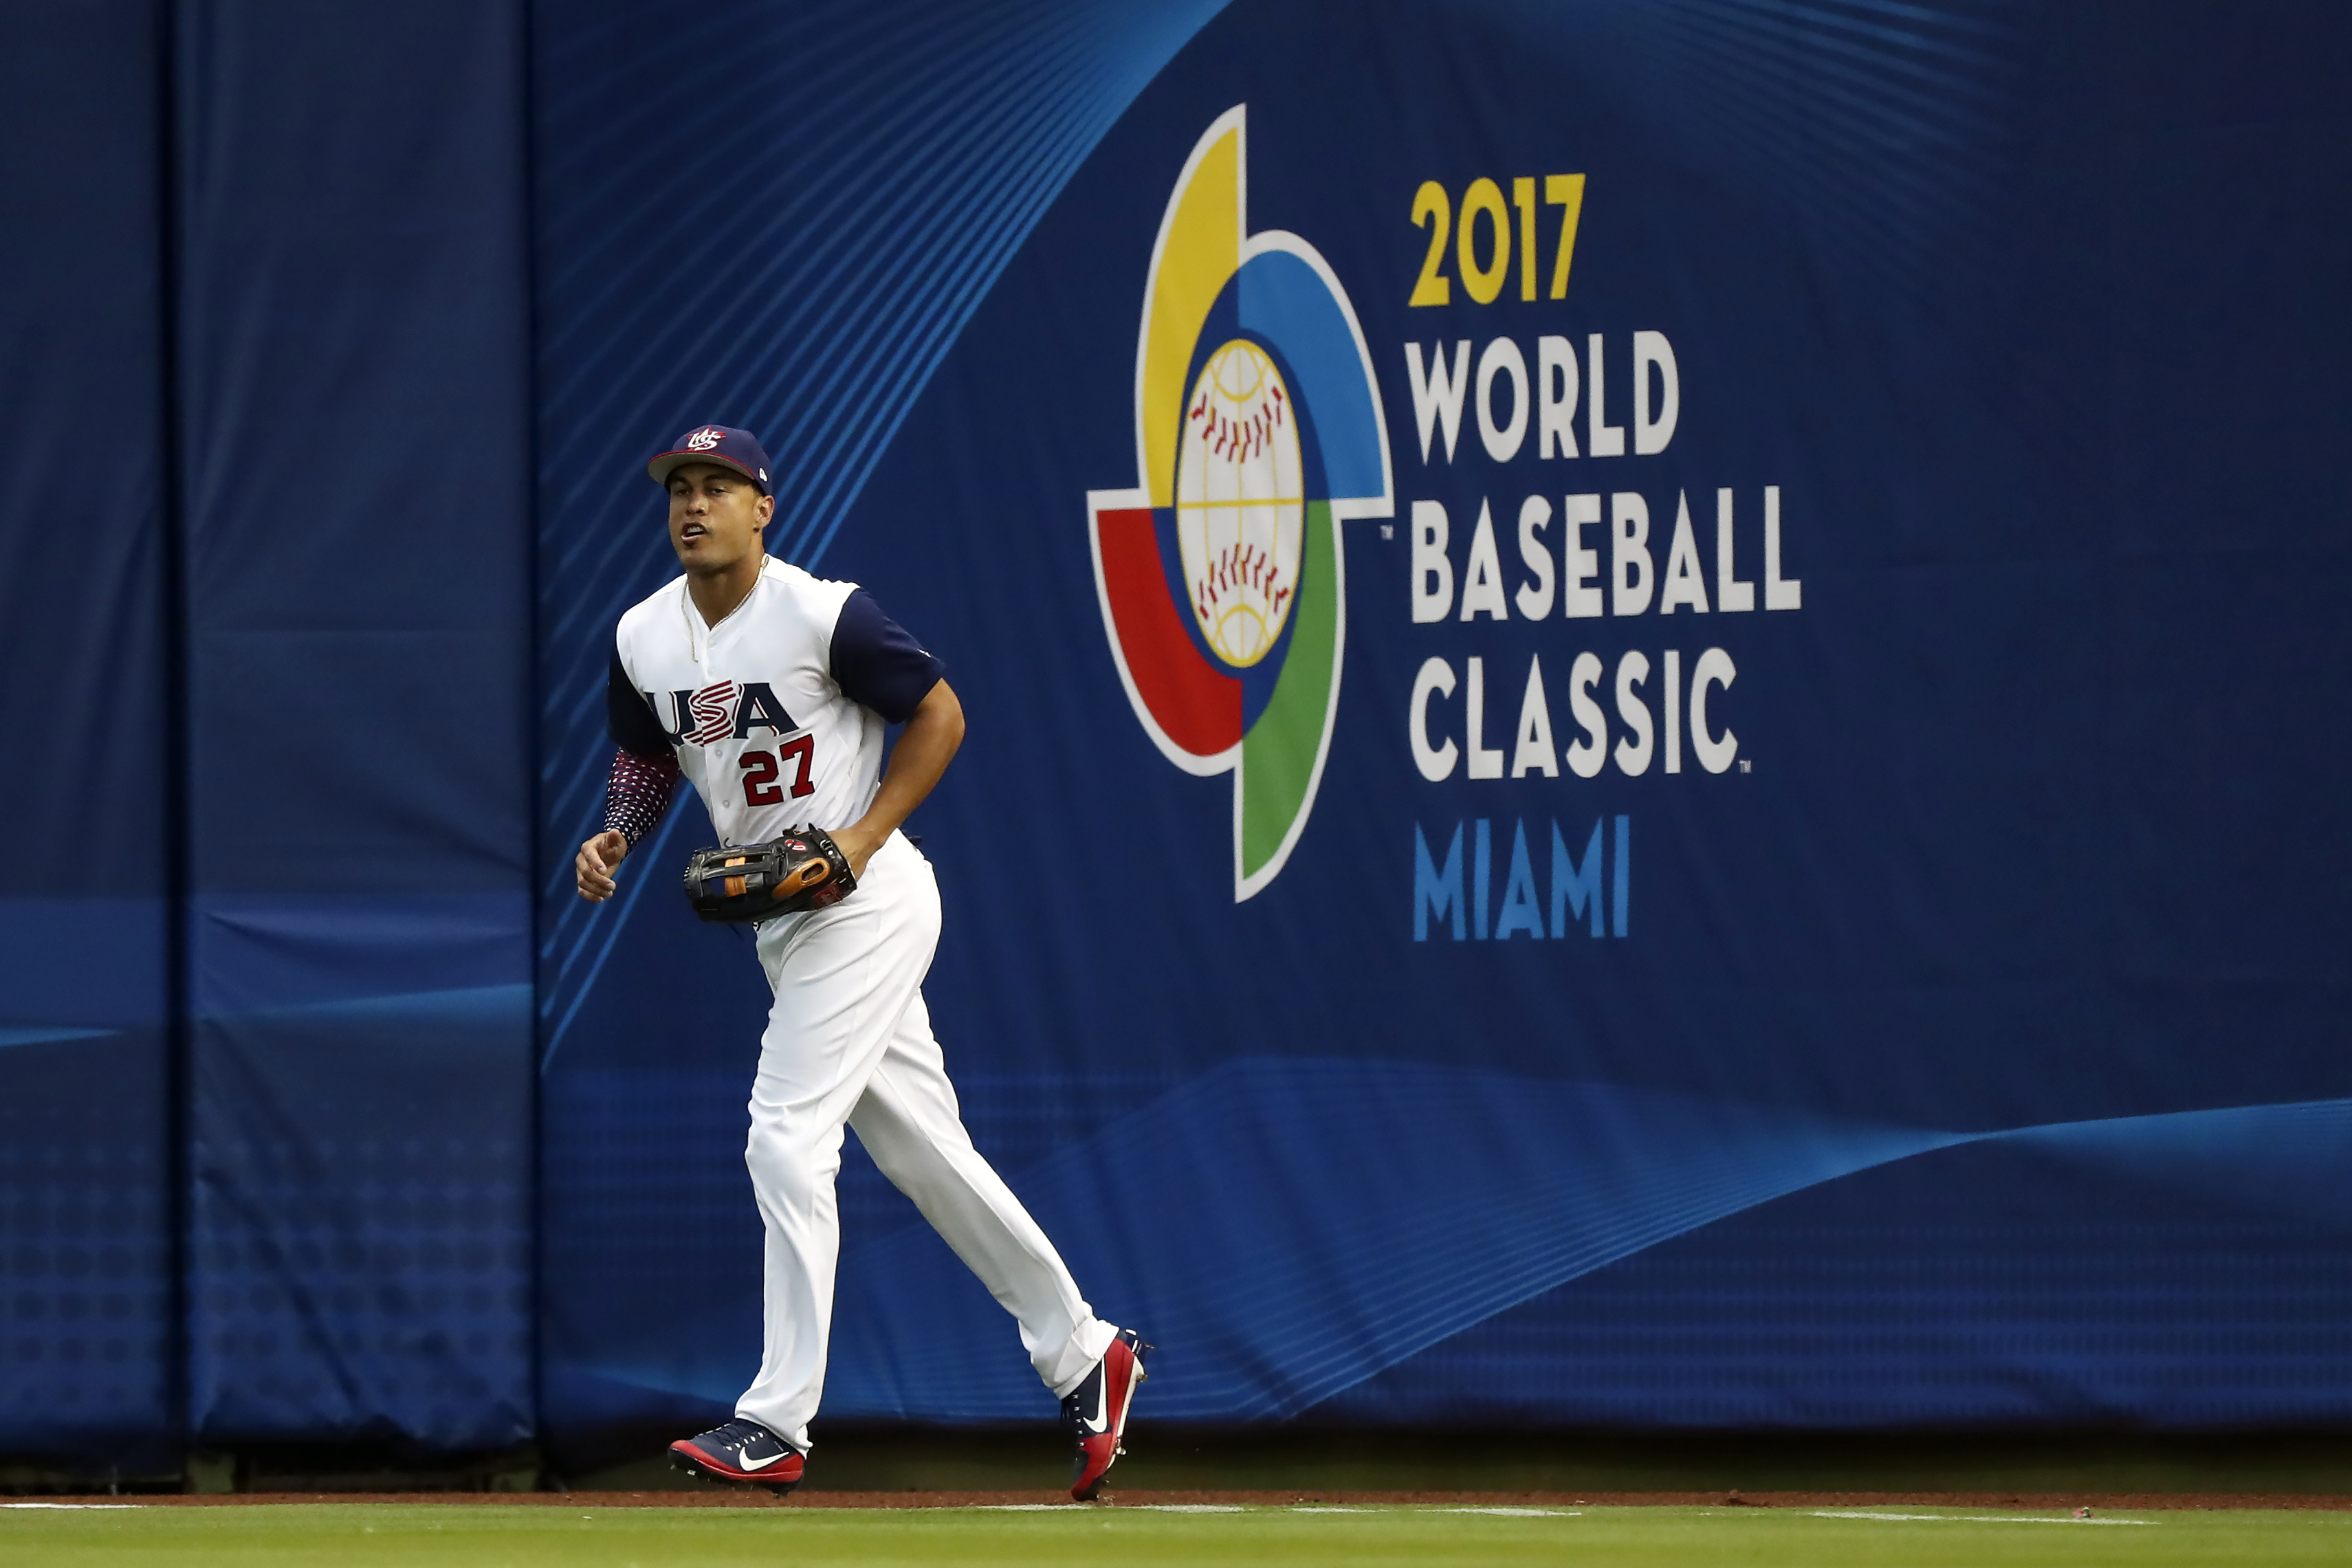 World Baseball Classic 2017 Team USA May Have Their Best Chance Yet